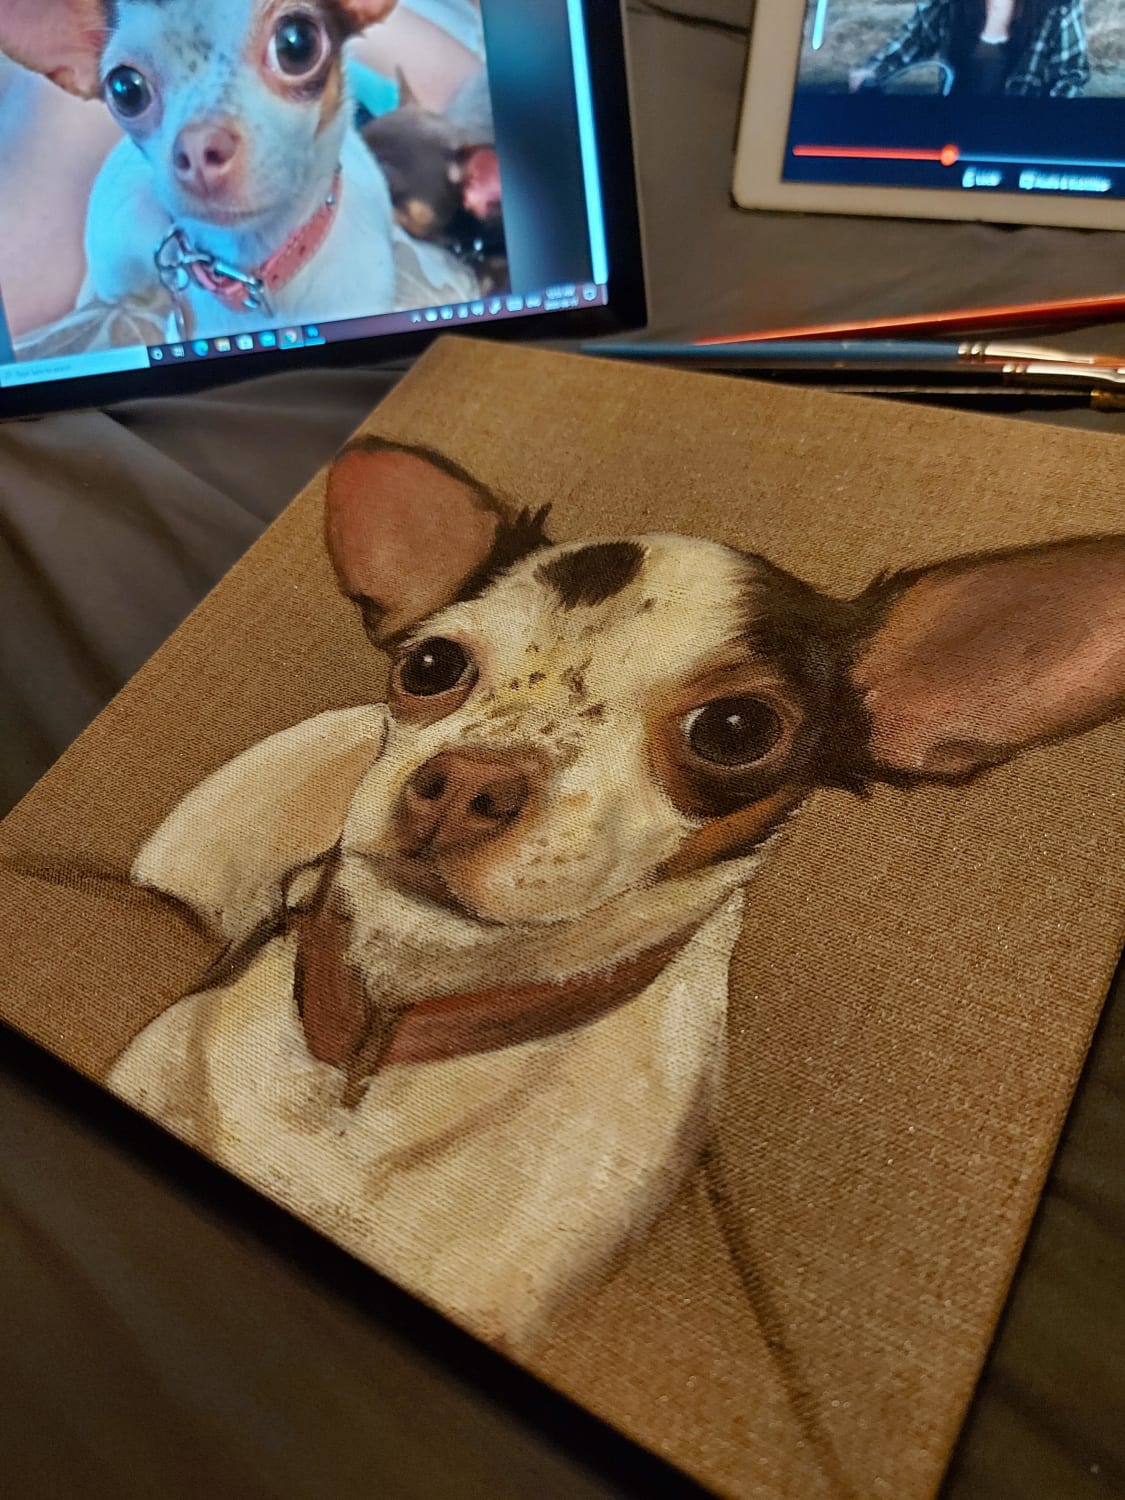 Some dear friends of mine lost this mama over quarantine so I decided to paint her for them. I'm still learning the intricacies of oils, I like the look of the raw linen in the background but I'm wondering if I should varnish?